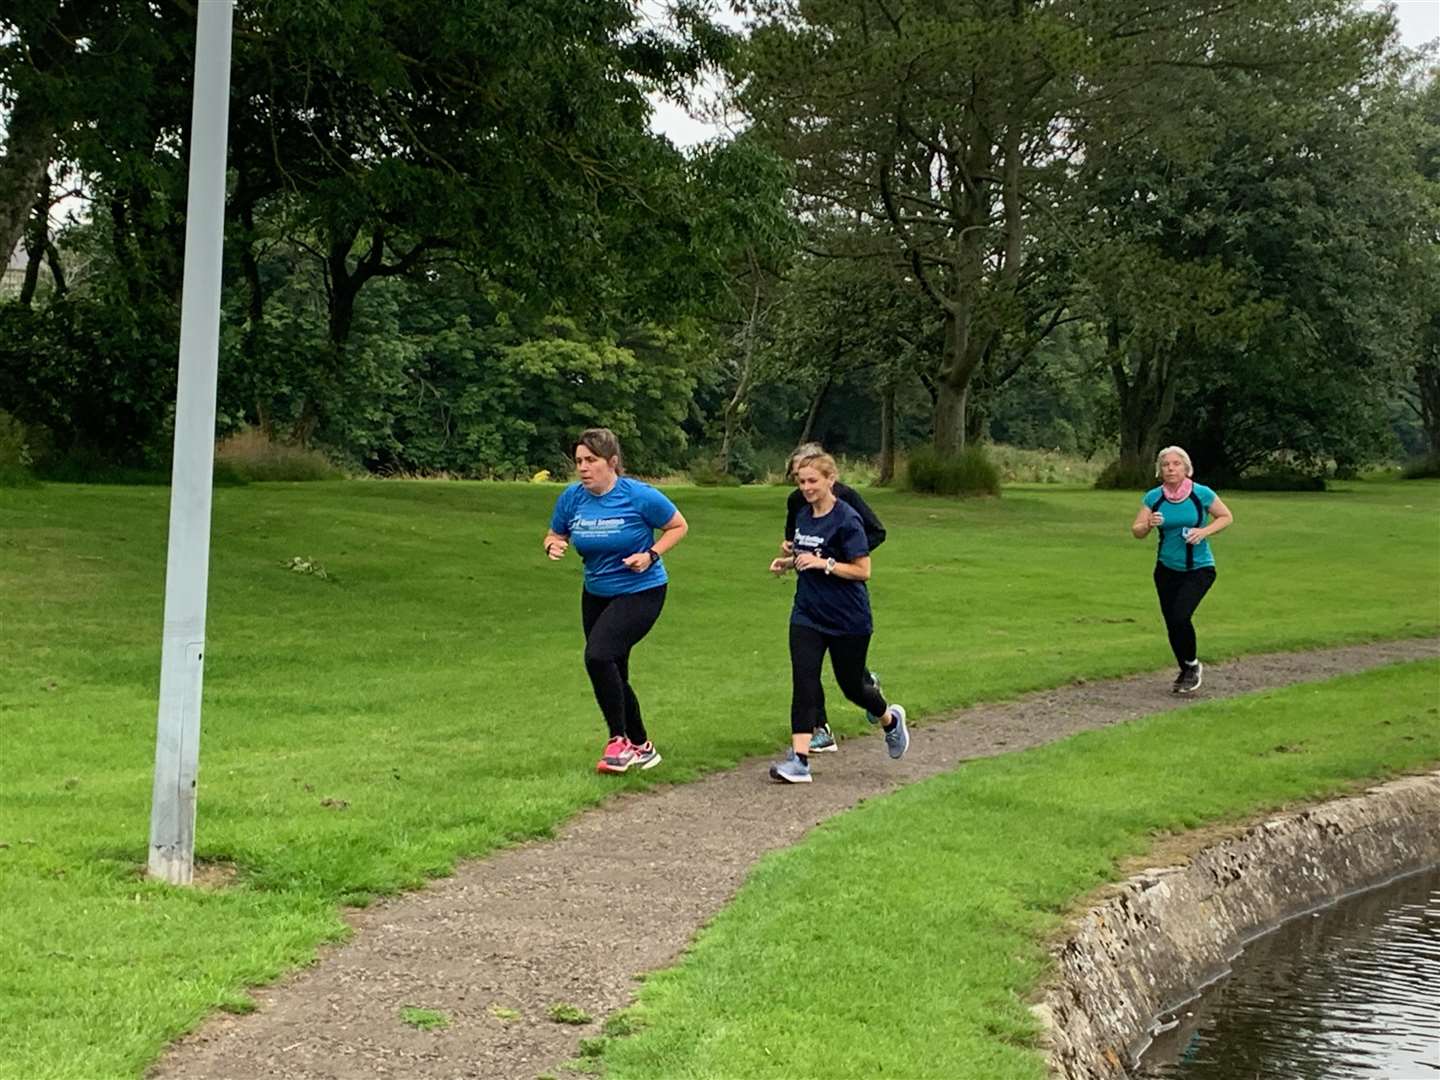 Runners took part in a parkrun trial on Monday ahead of the real thing on Saturday.